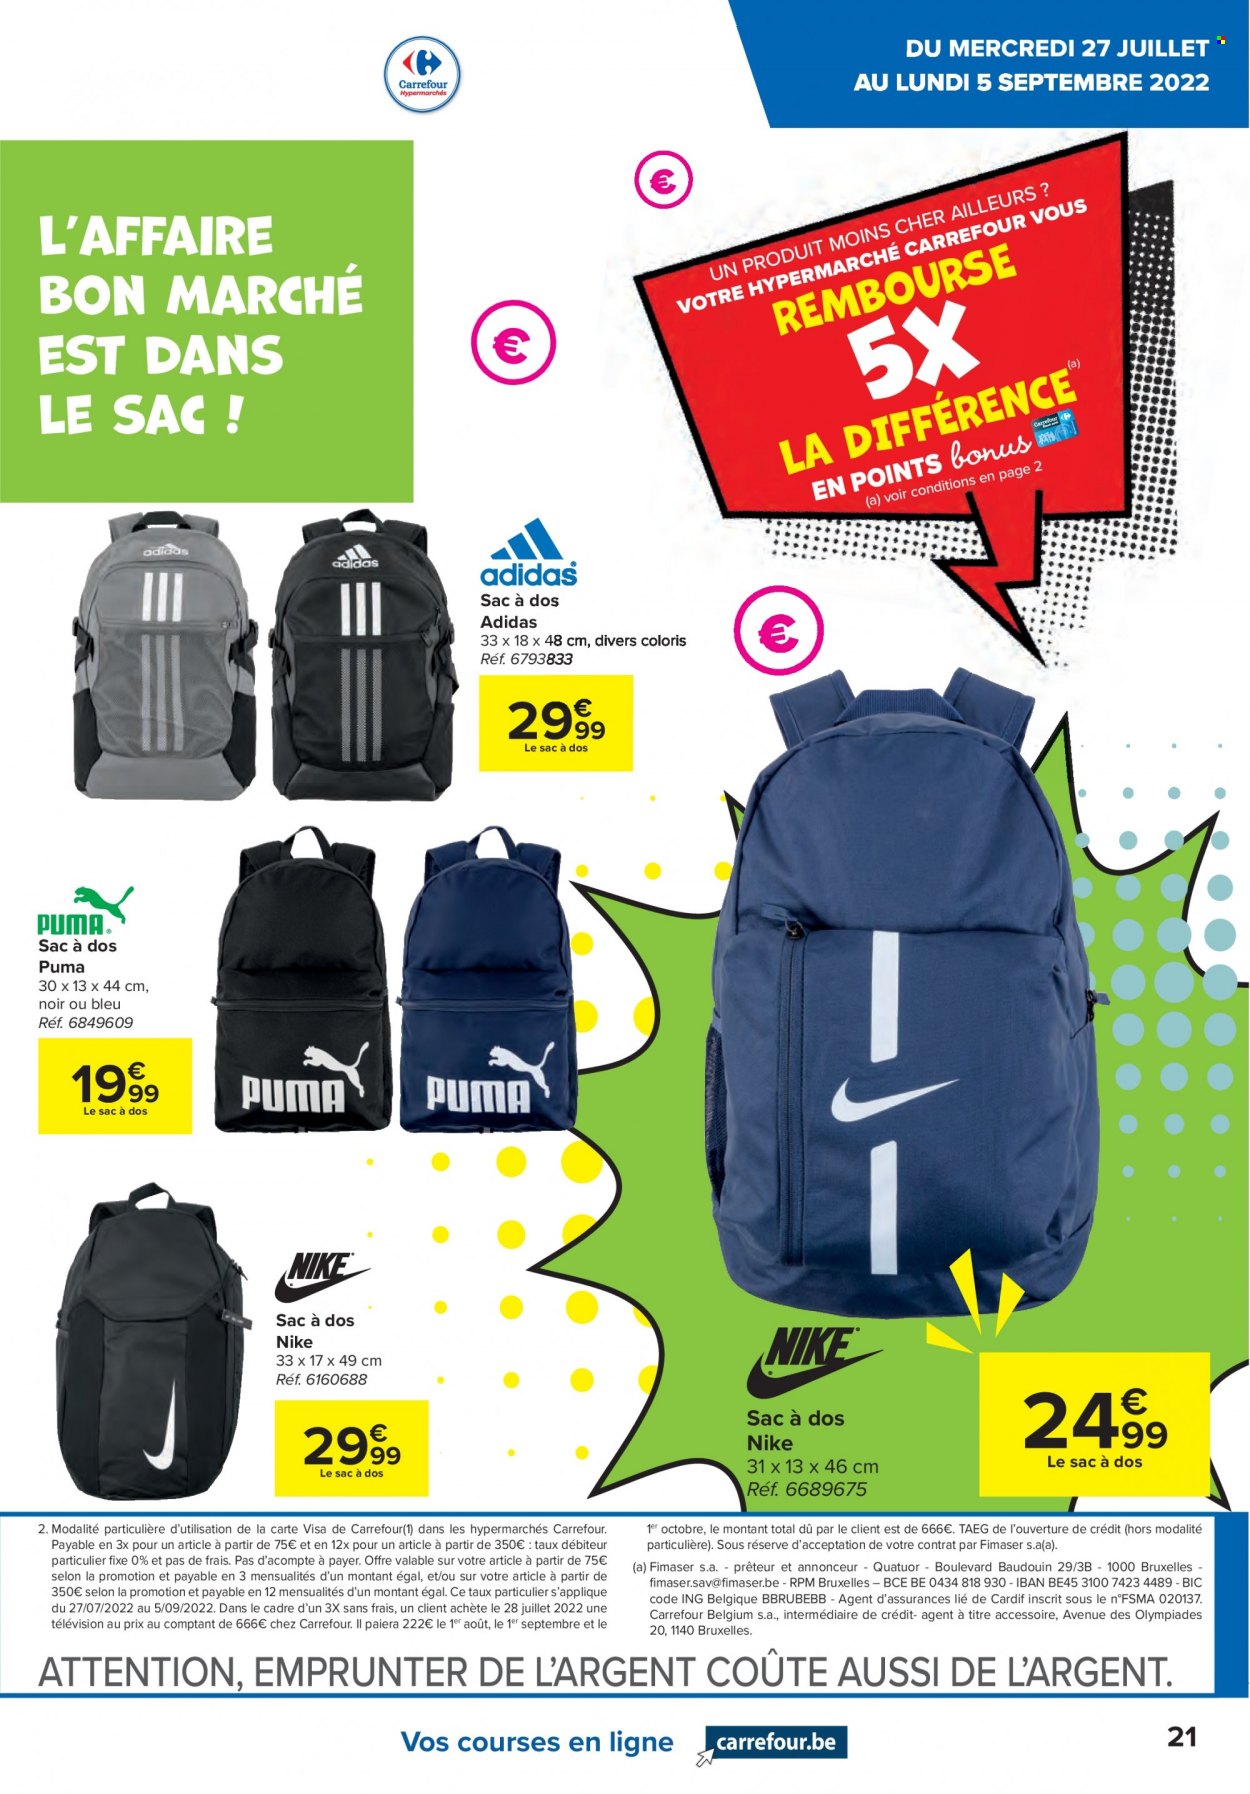 Catalogue Carrefour hypermarkt - 27.7.2022 - 5.9.2022. Page 21.